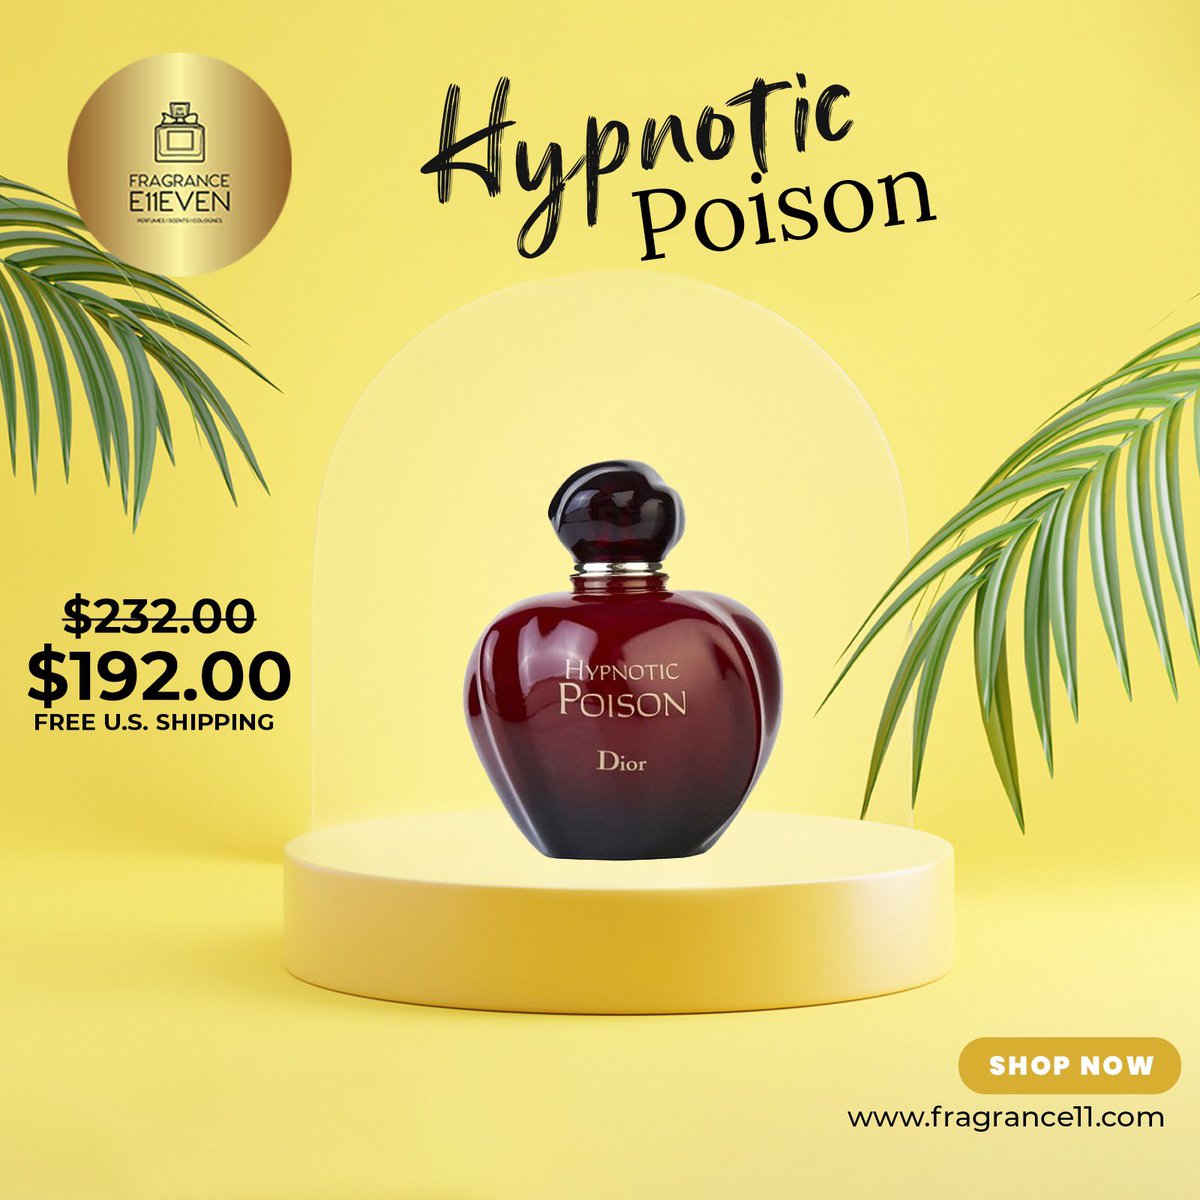 Hypnotic Poison Eau Secrete by Dior is a Amber Floral fragrance for women. Hypnotic Poison Eau Secrete was launched in 2013.

#fragrance11 #fragrance #fragrances #scentoftheday #fragrancelover #perfumeaddict #perfumelovers #perfumelover #scents #fragranceaddict #cologne